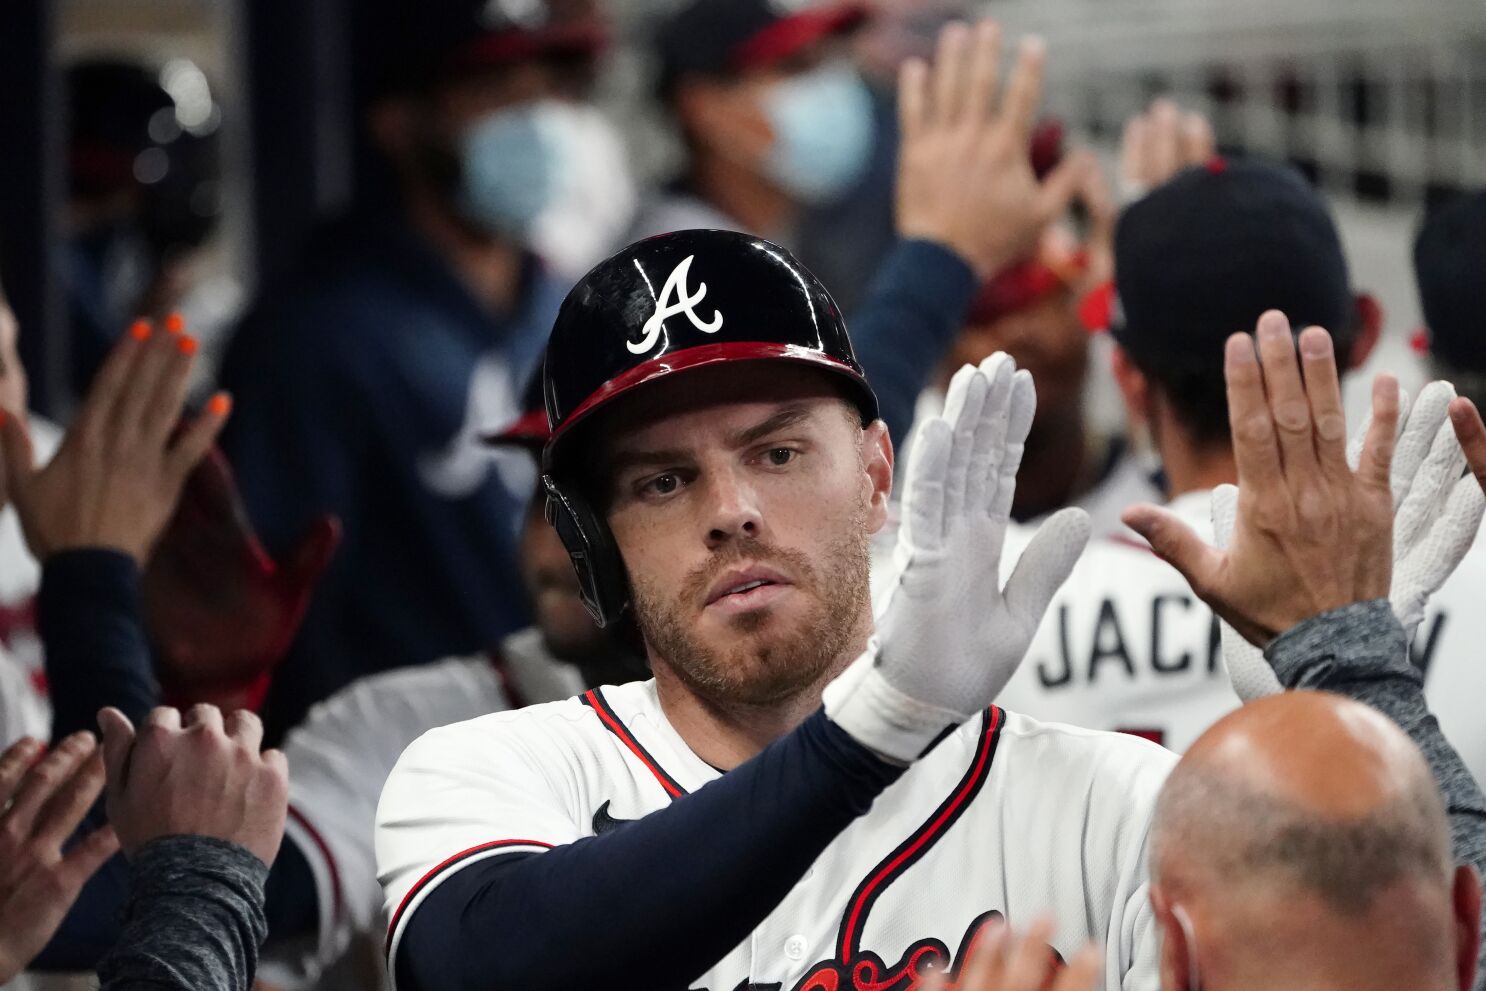 Preview: Fried rejoins the rotation as the Braves visit Dansby